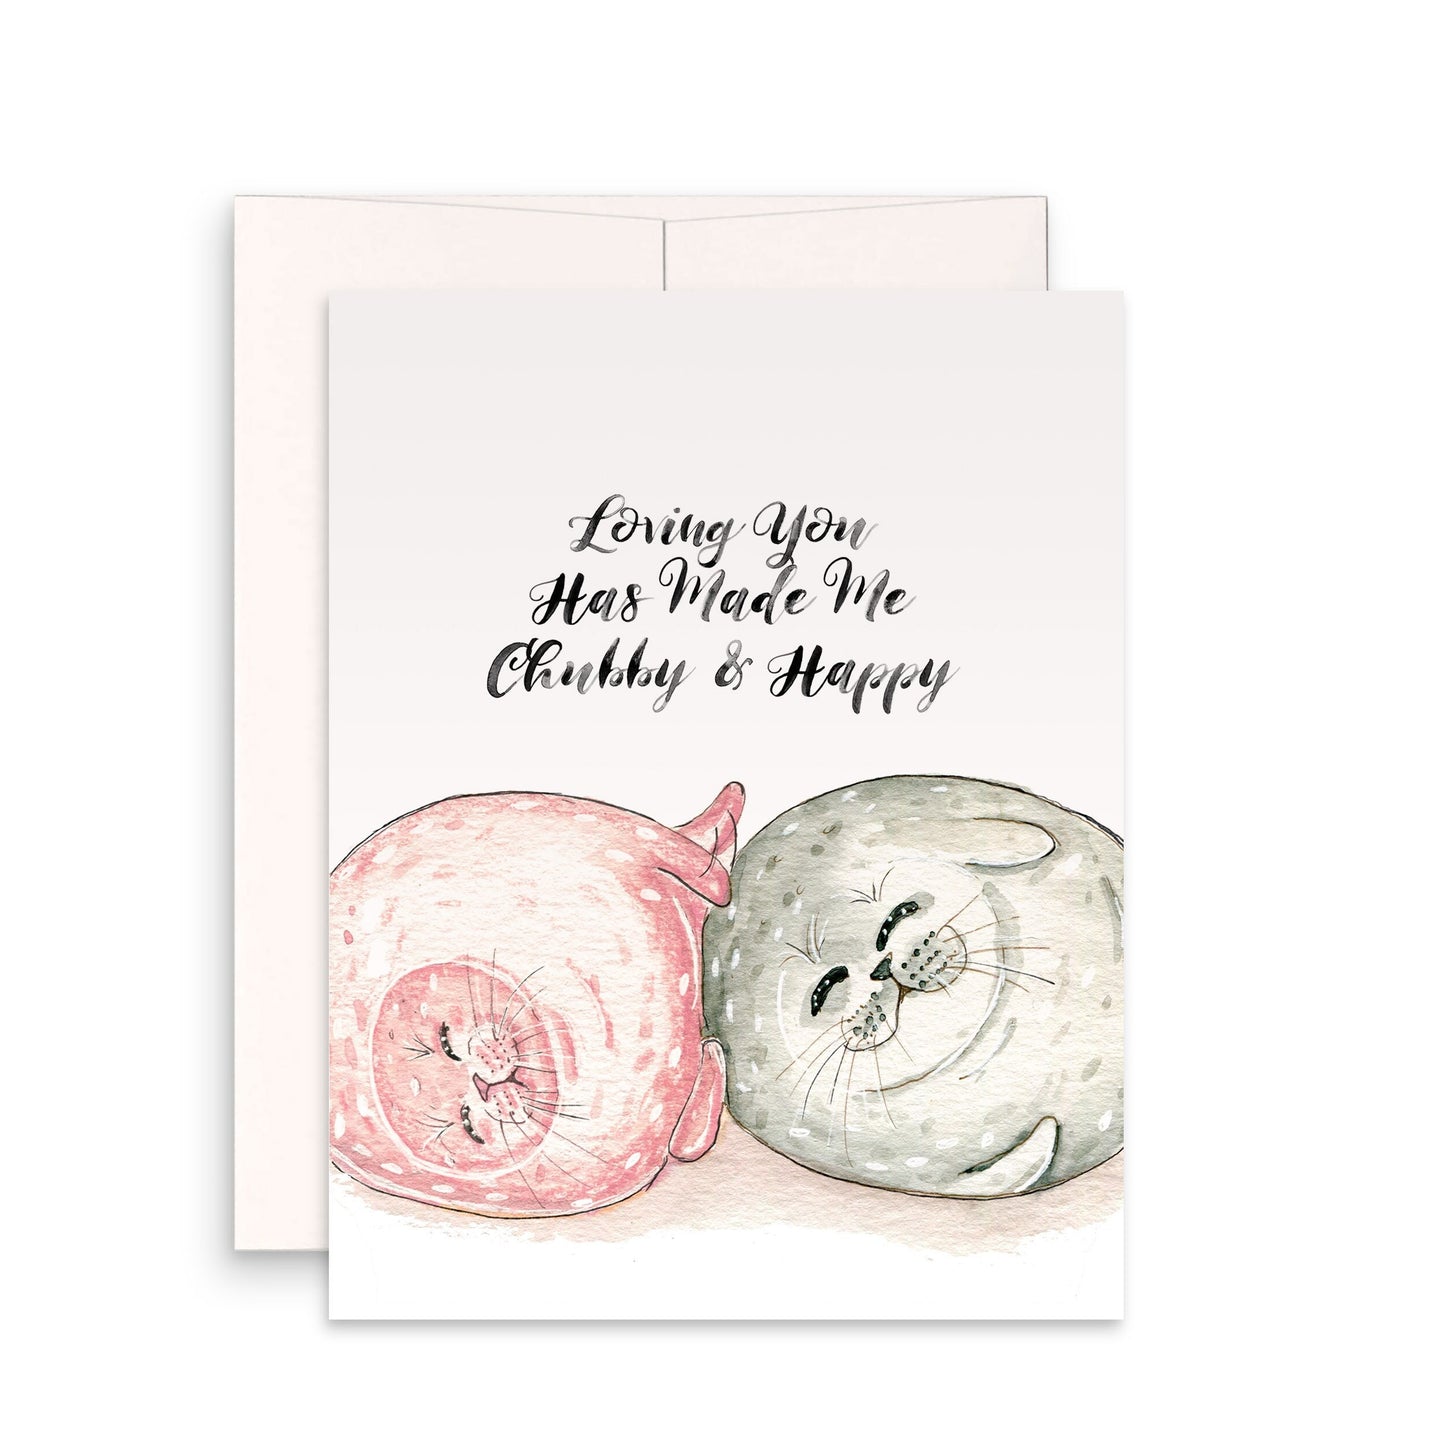 Chunky Seal Couple Anniversary Card For Husband - Funny Valentines Day Card For Girlfriend